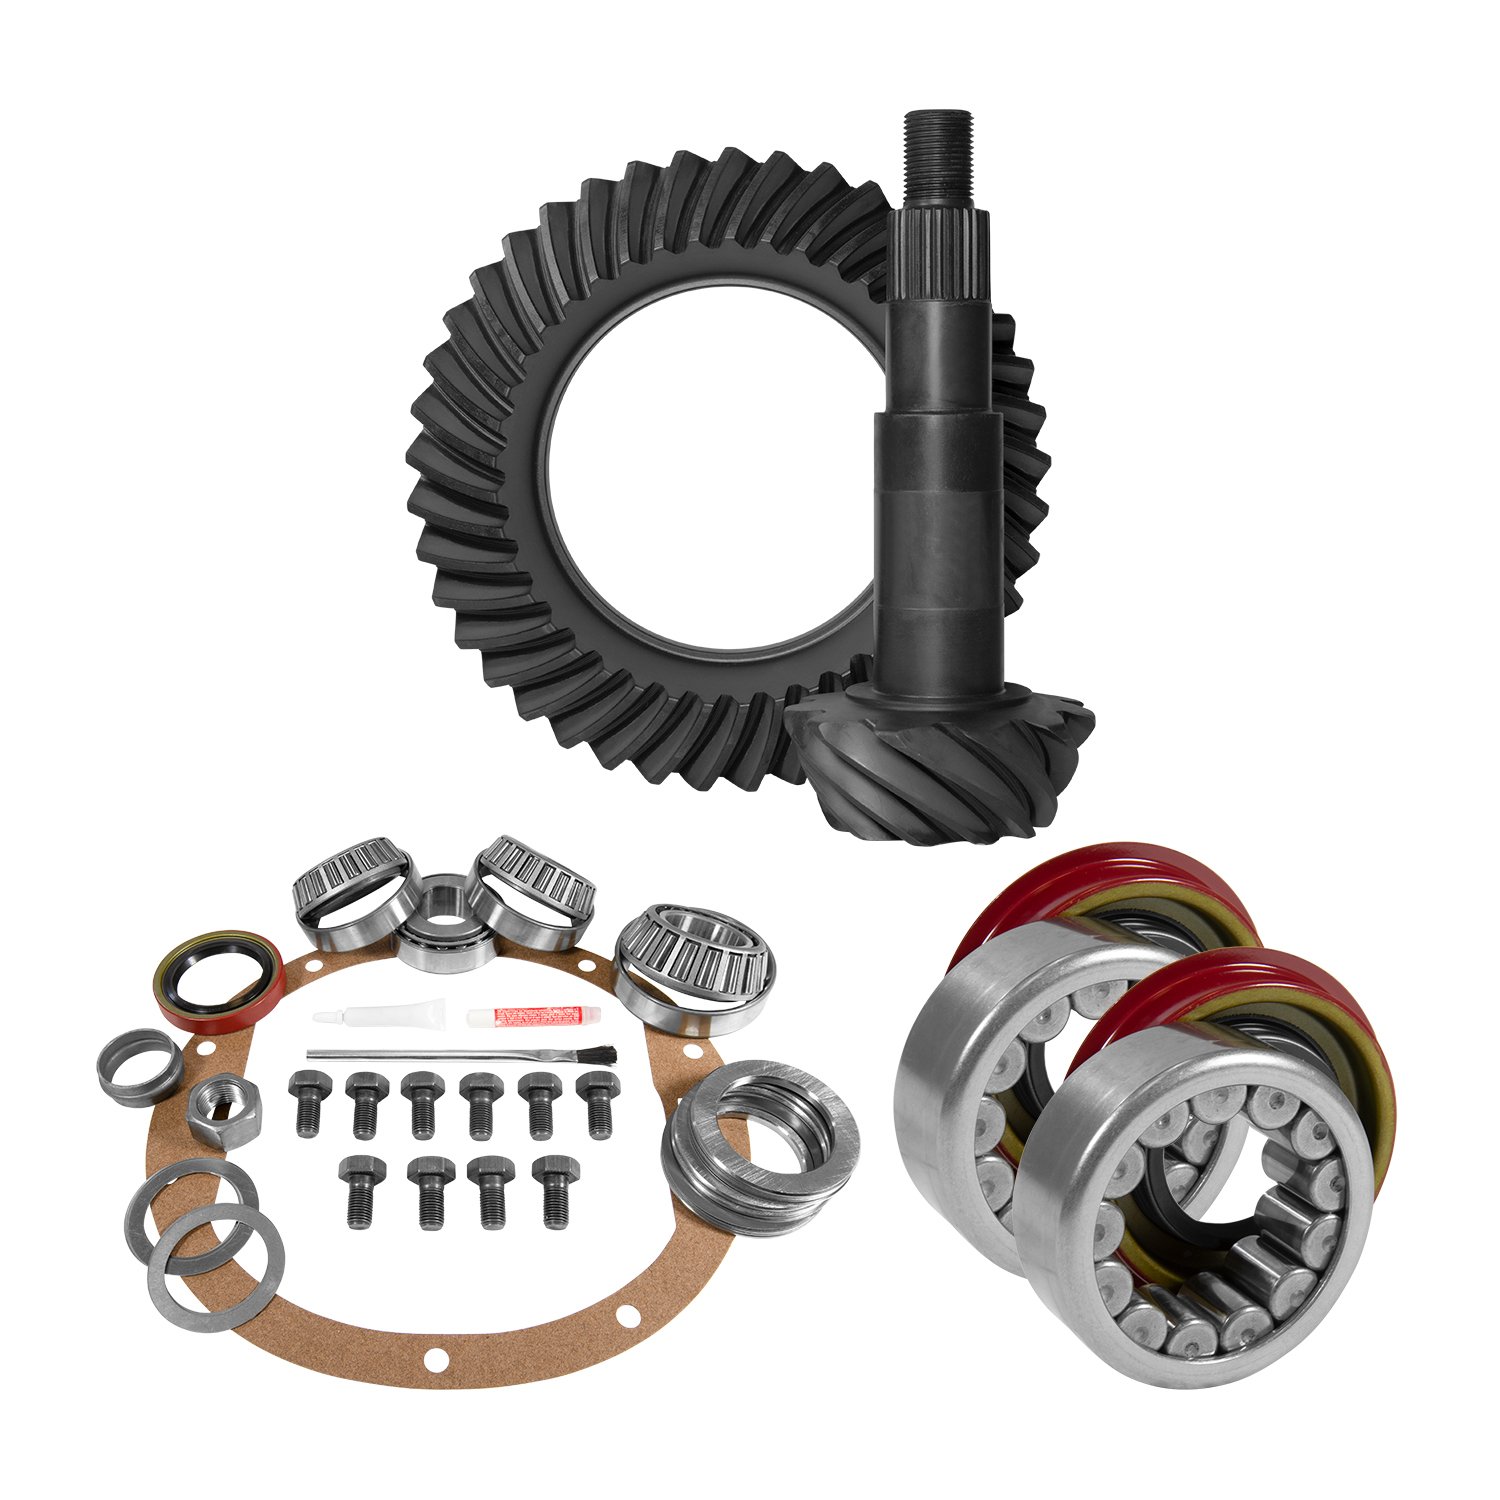 USA Standard 10724 8.5 in. GM 4.11 Rear Ring & Pinion Install Kit, Axle Bearings, 1.625 in. Case Journal